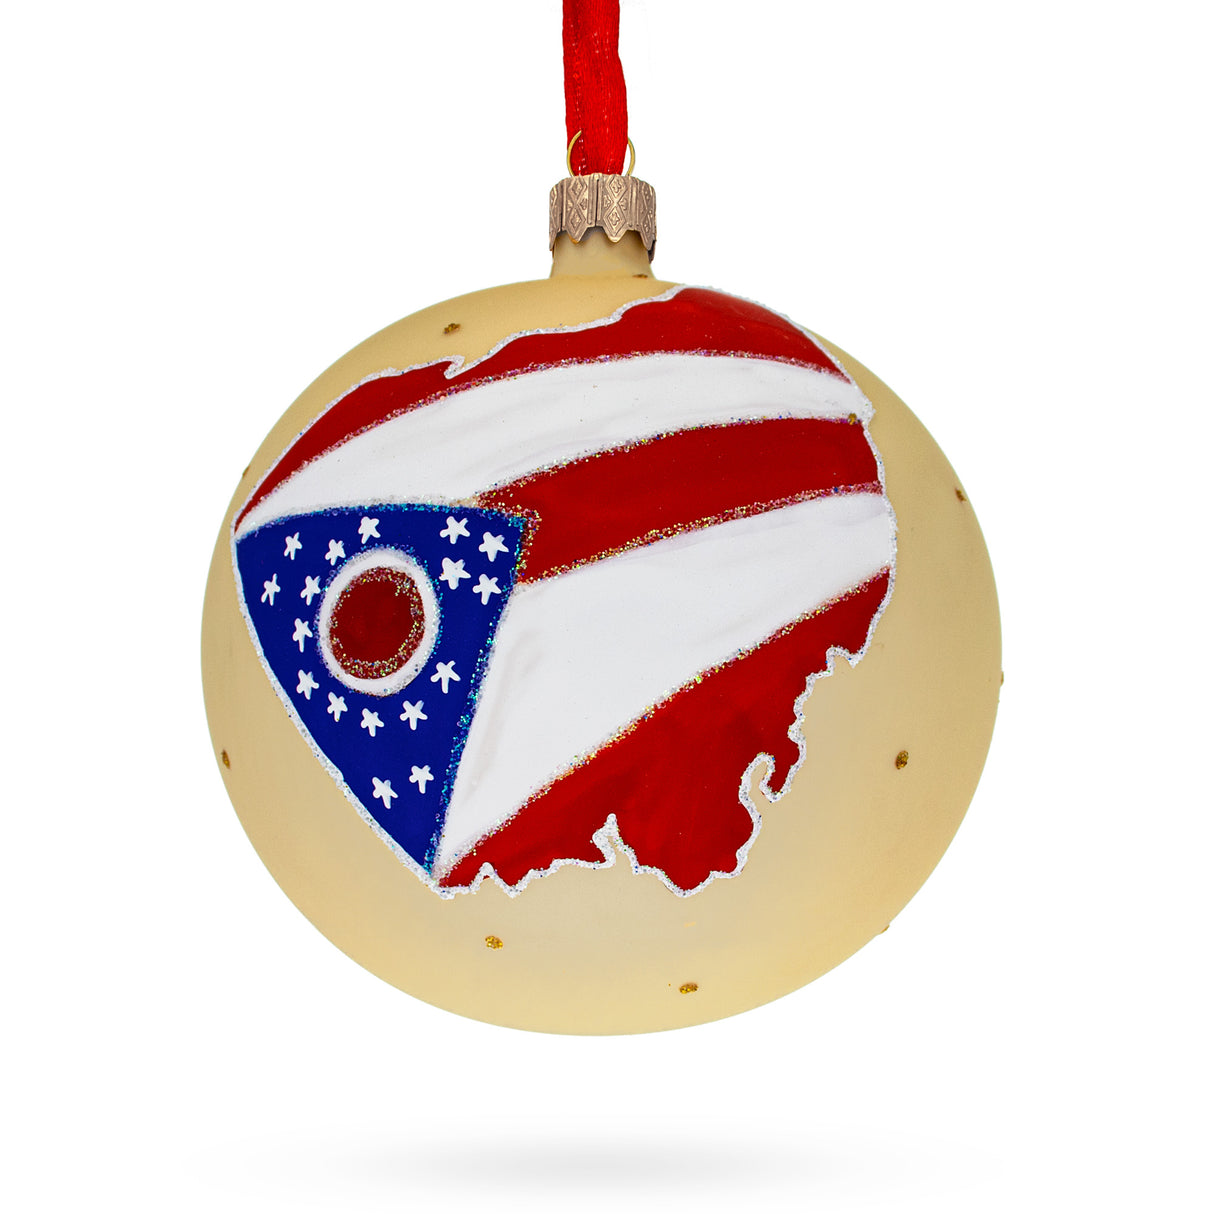 Ohio State, USA Glass Ball Christmas Ornament 4 Inches in Multi color, Round shape